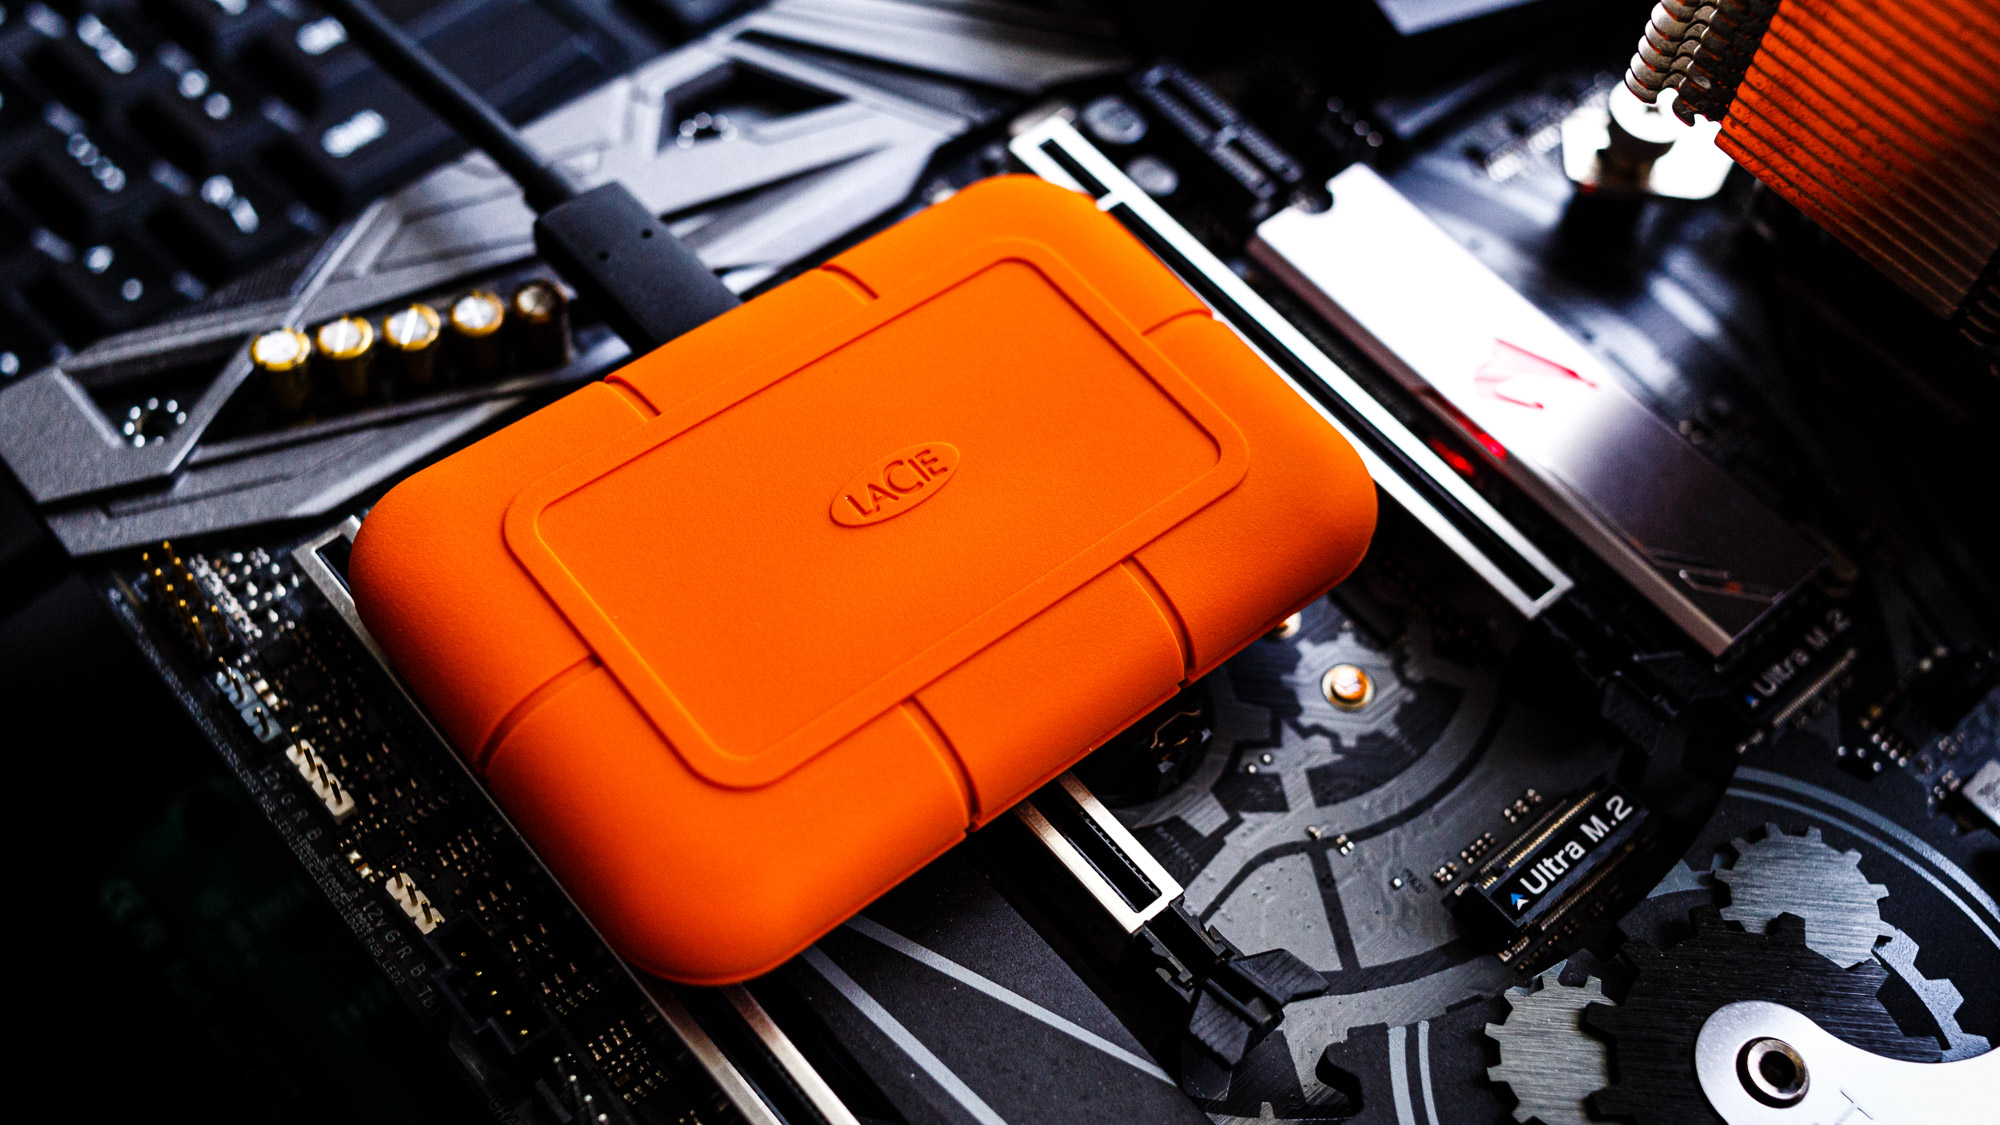 1TB Performance Results - LaCie Rugged SSD Review: Tough, Secure